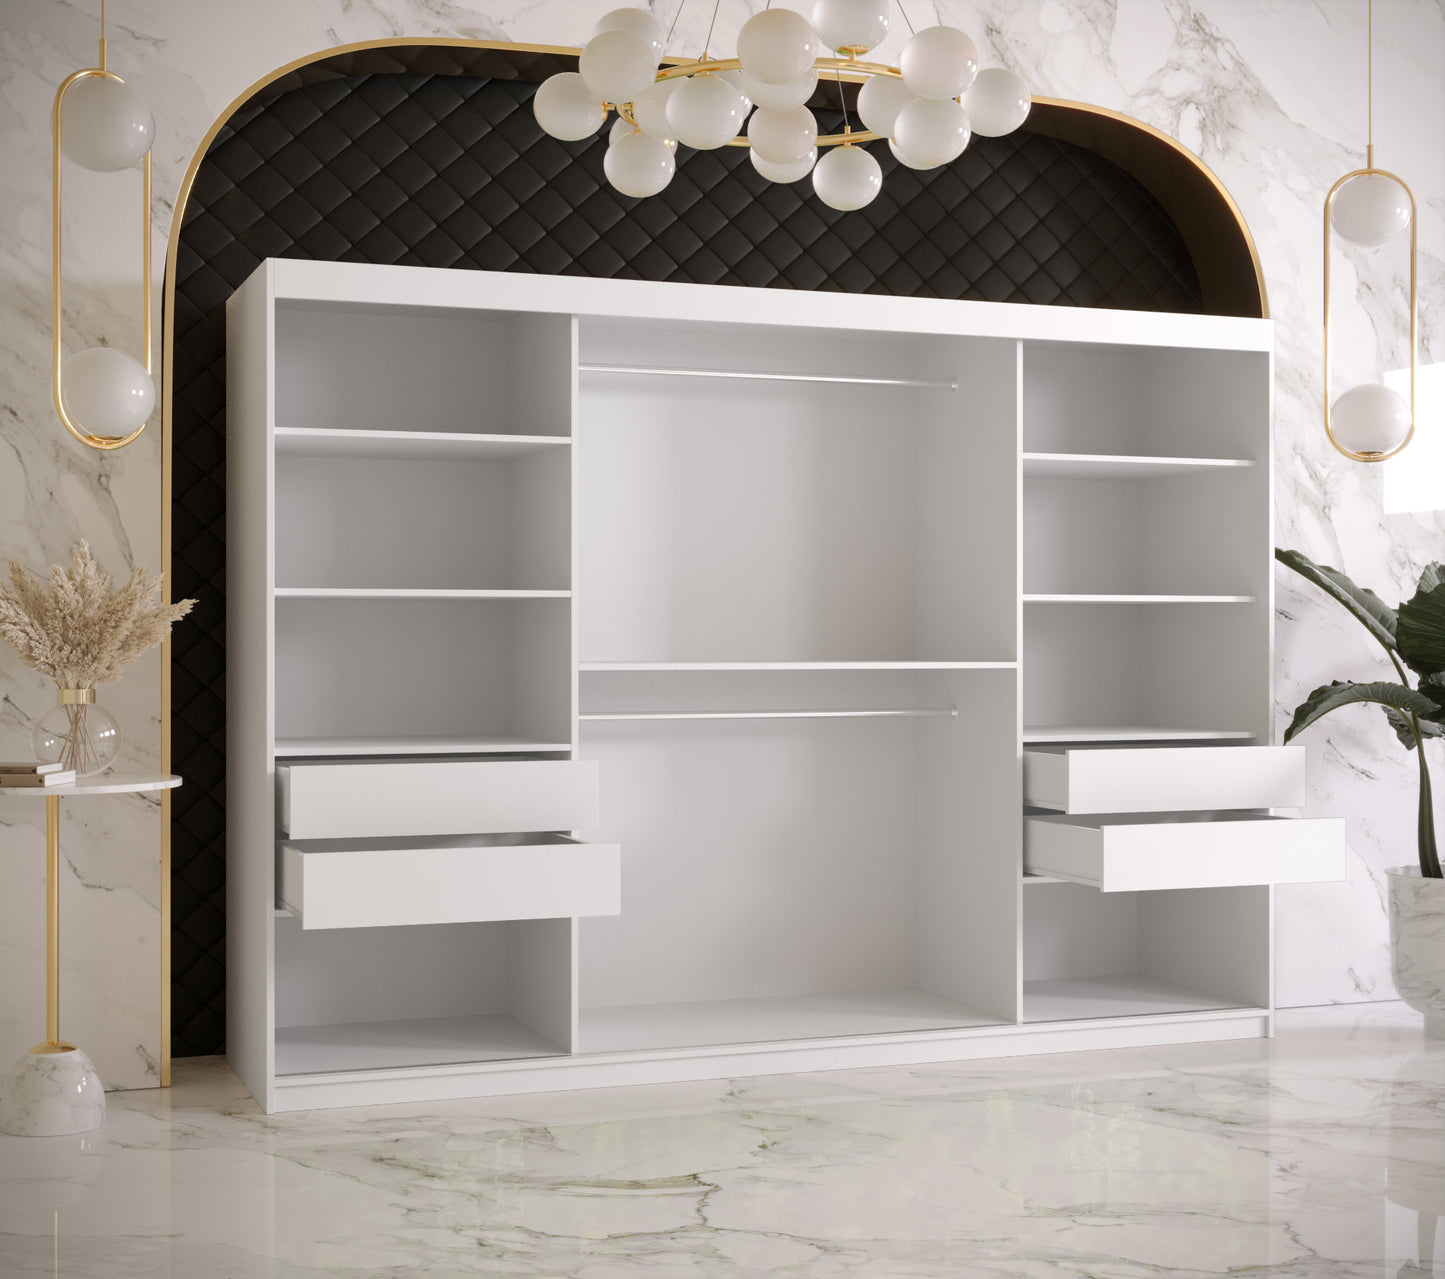 FERN 2 - Wardrobe with  Fern Pattern Mirror and Sliding Doors, Self Closing Optional, Drawers Optional, ASSEMBLY INCLUDED >250cm<